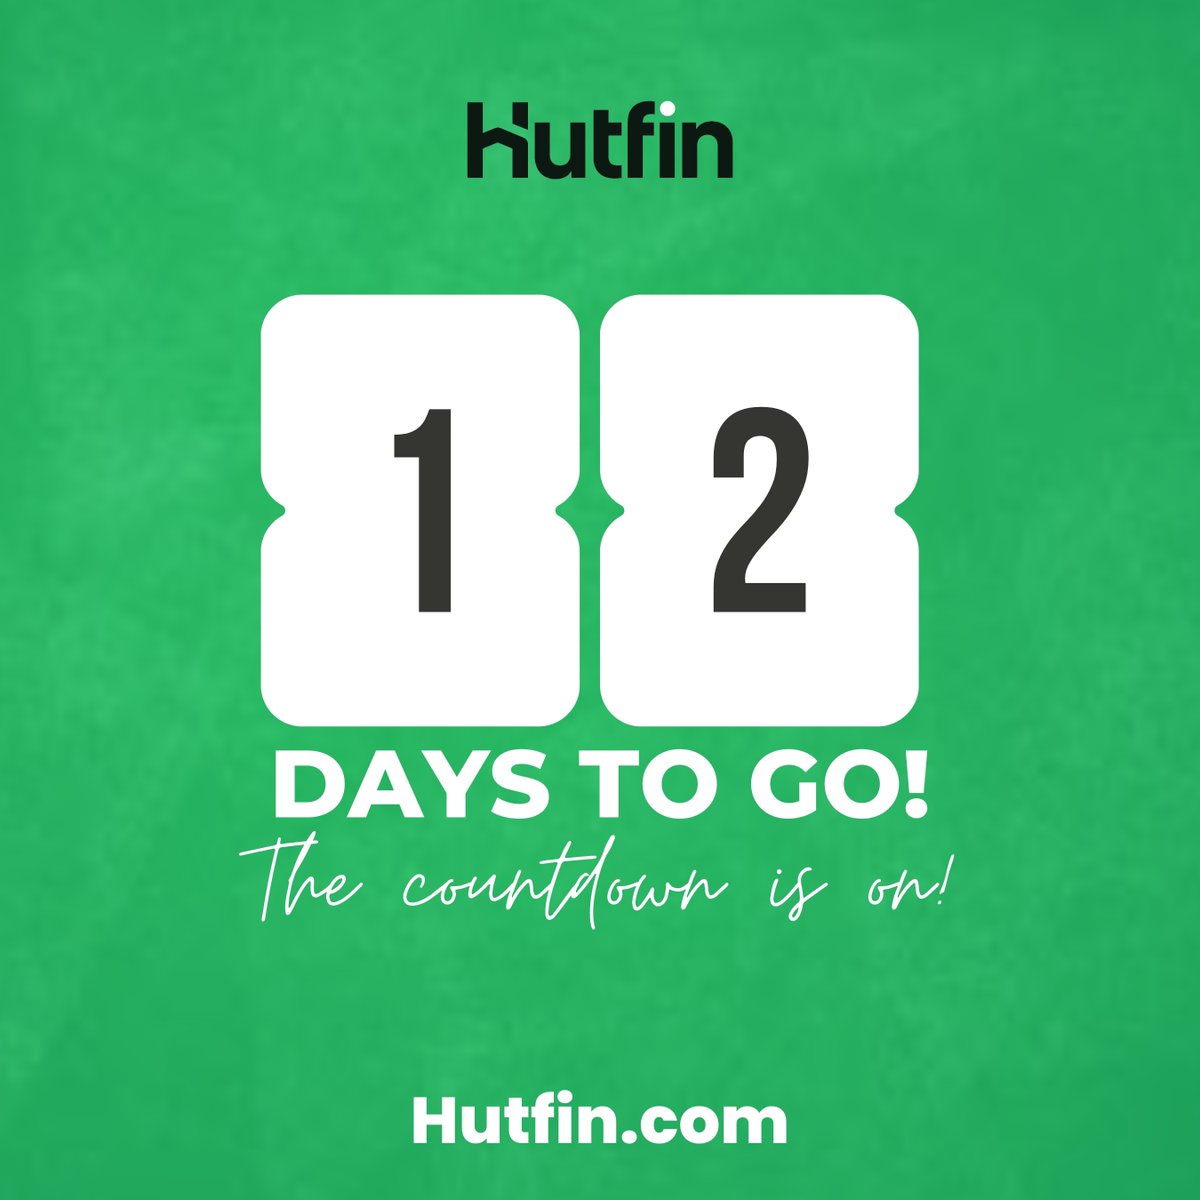 Just 12 days to go! 🎉 We’re gearing up for a big reveal that will transform commercial real estate. Get ready to be amazed!

🤗 Comment 
👑 Follow for more sneak peeks!

#HutfinLaunch #12DaysToGo #CommercialRealEstate